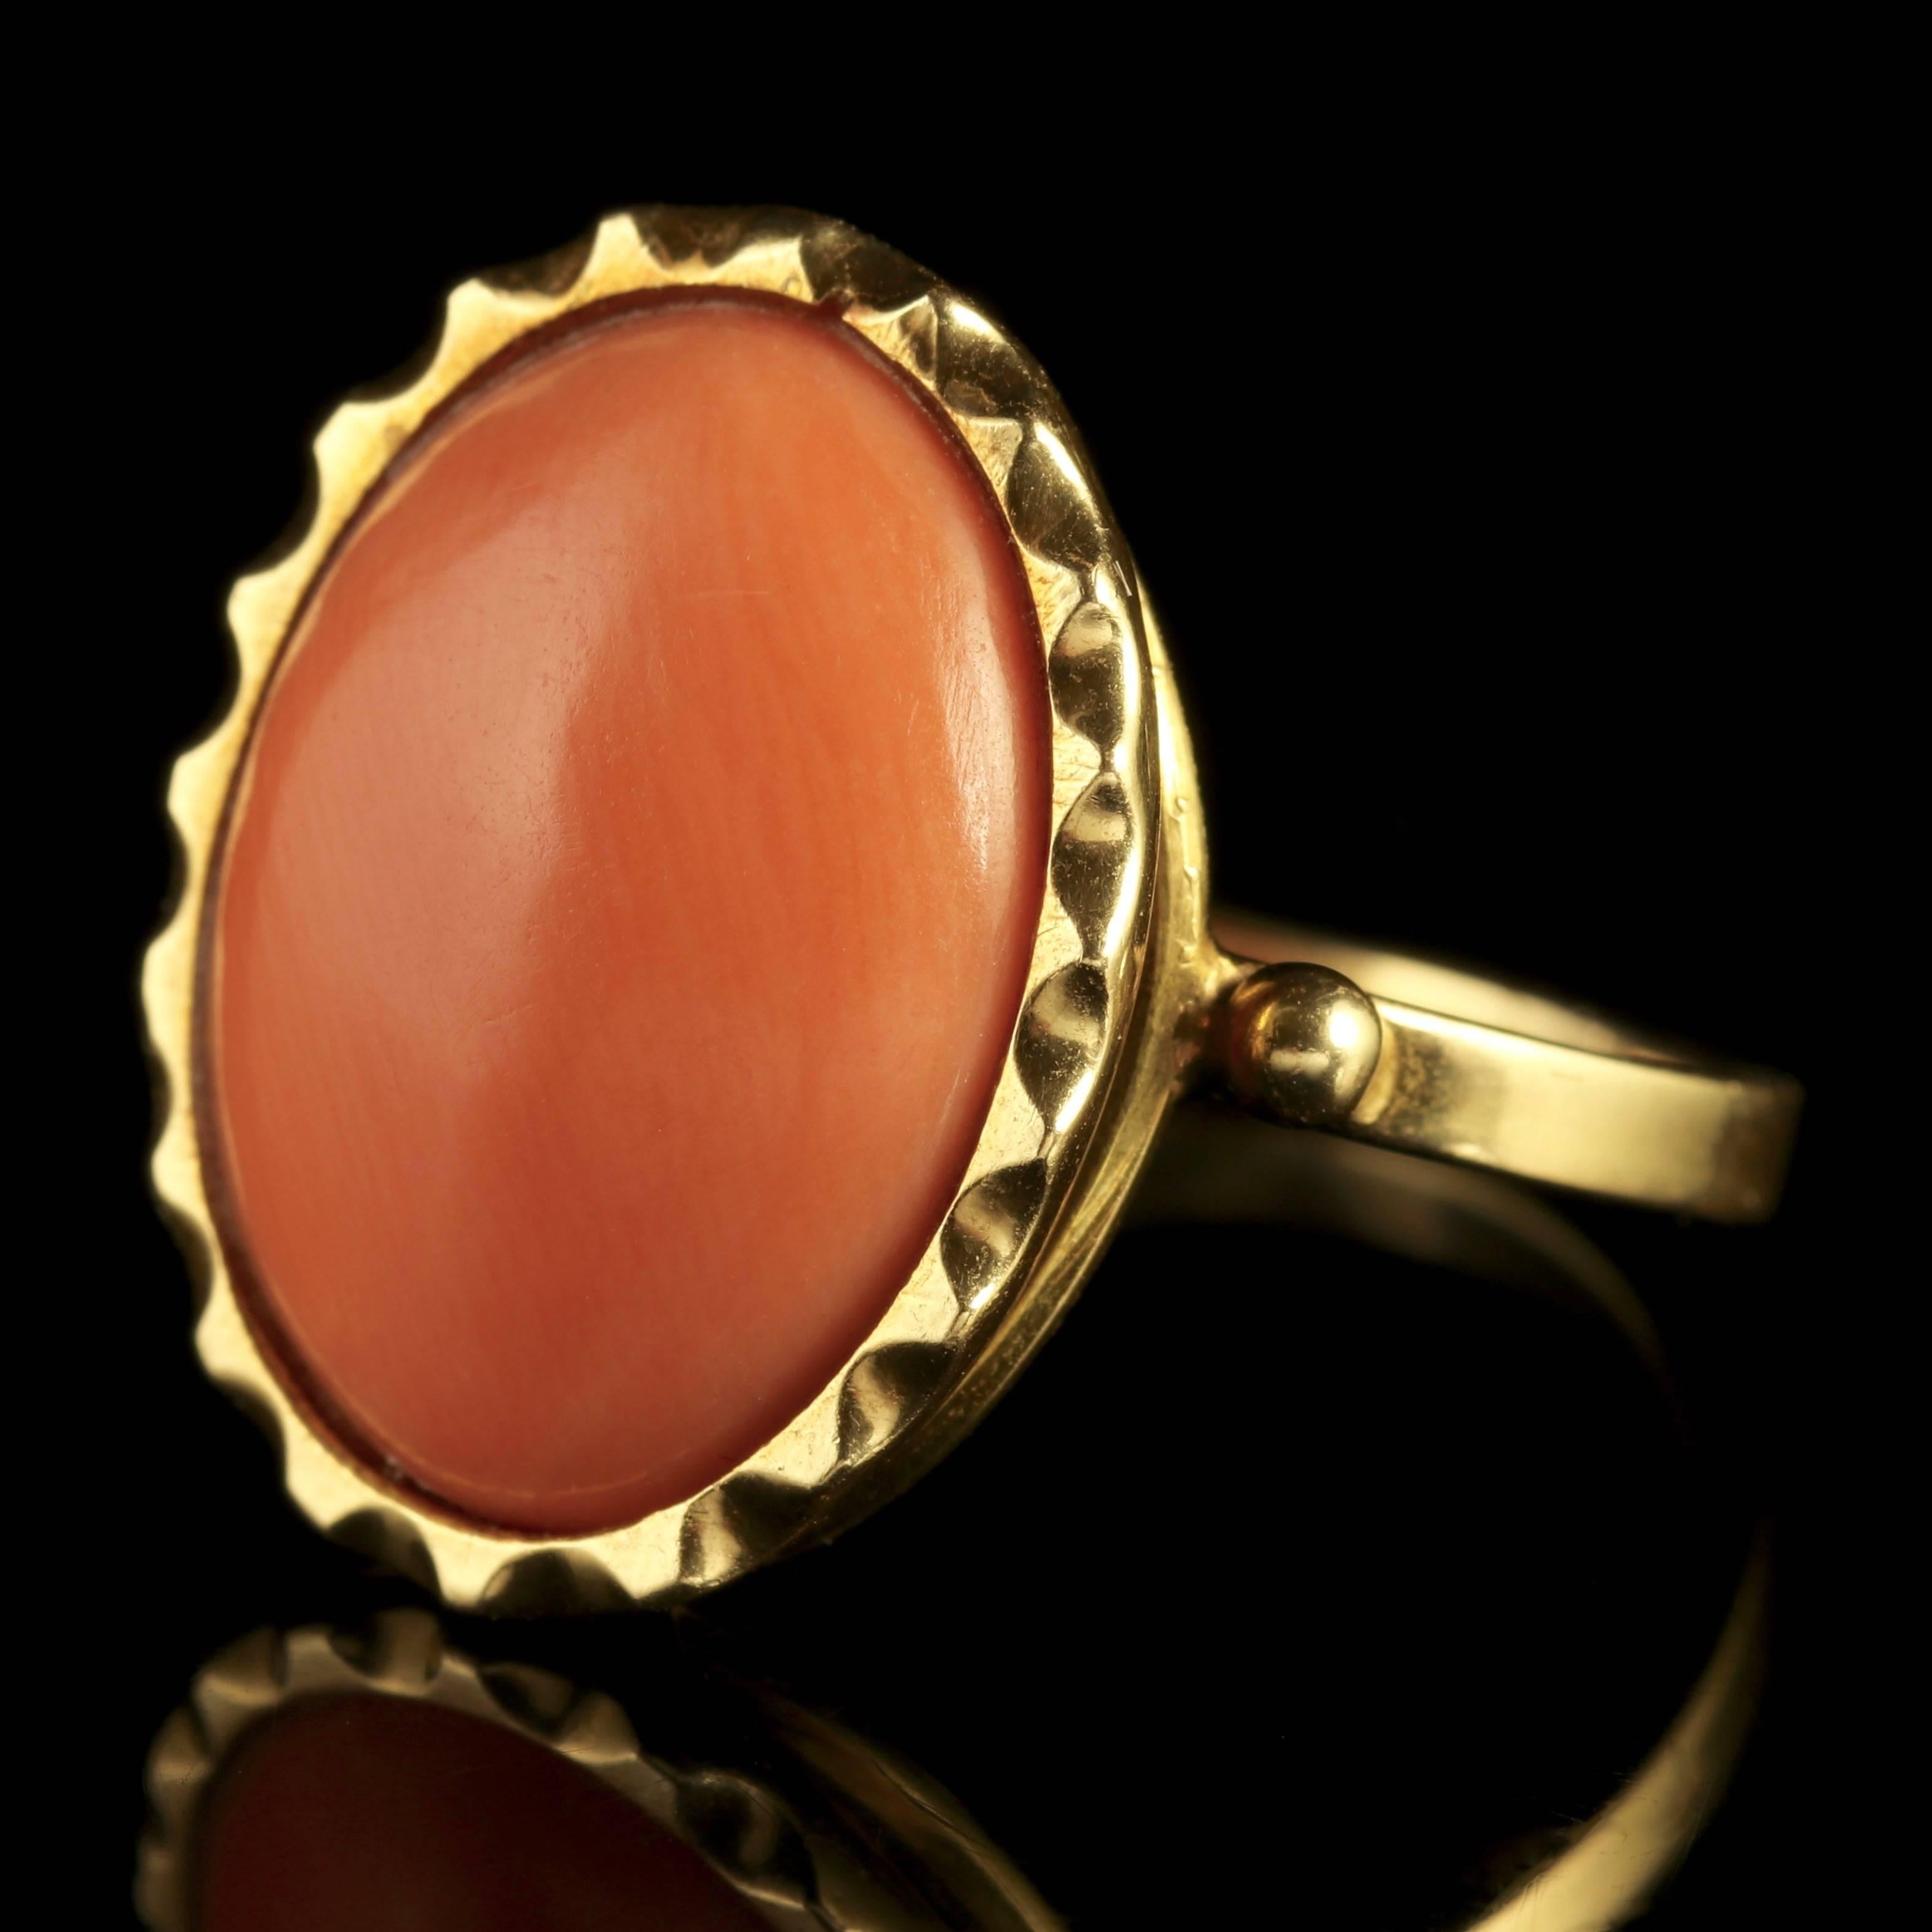 To read more please click continue reading below-

This fabulous Antique Victorian 15ct Yellow Gold ring is Circa 1900.

The ring boasts a lovely rich orange Coral gem which is over 8ct in size.

From the depths of the sea, comes the beautiful Coral